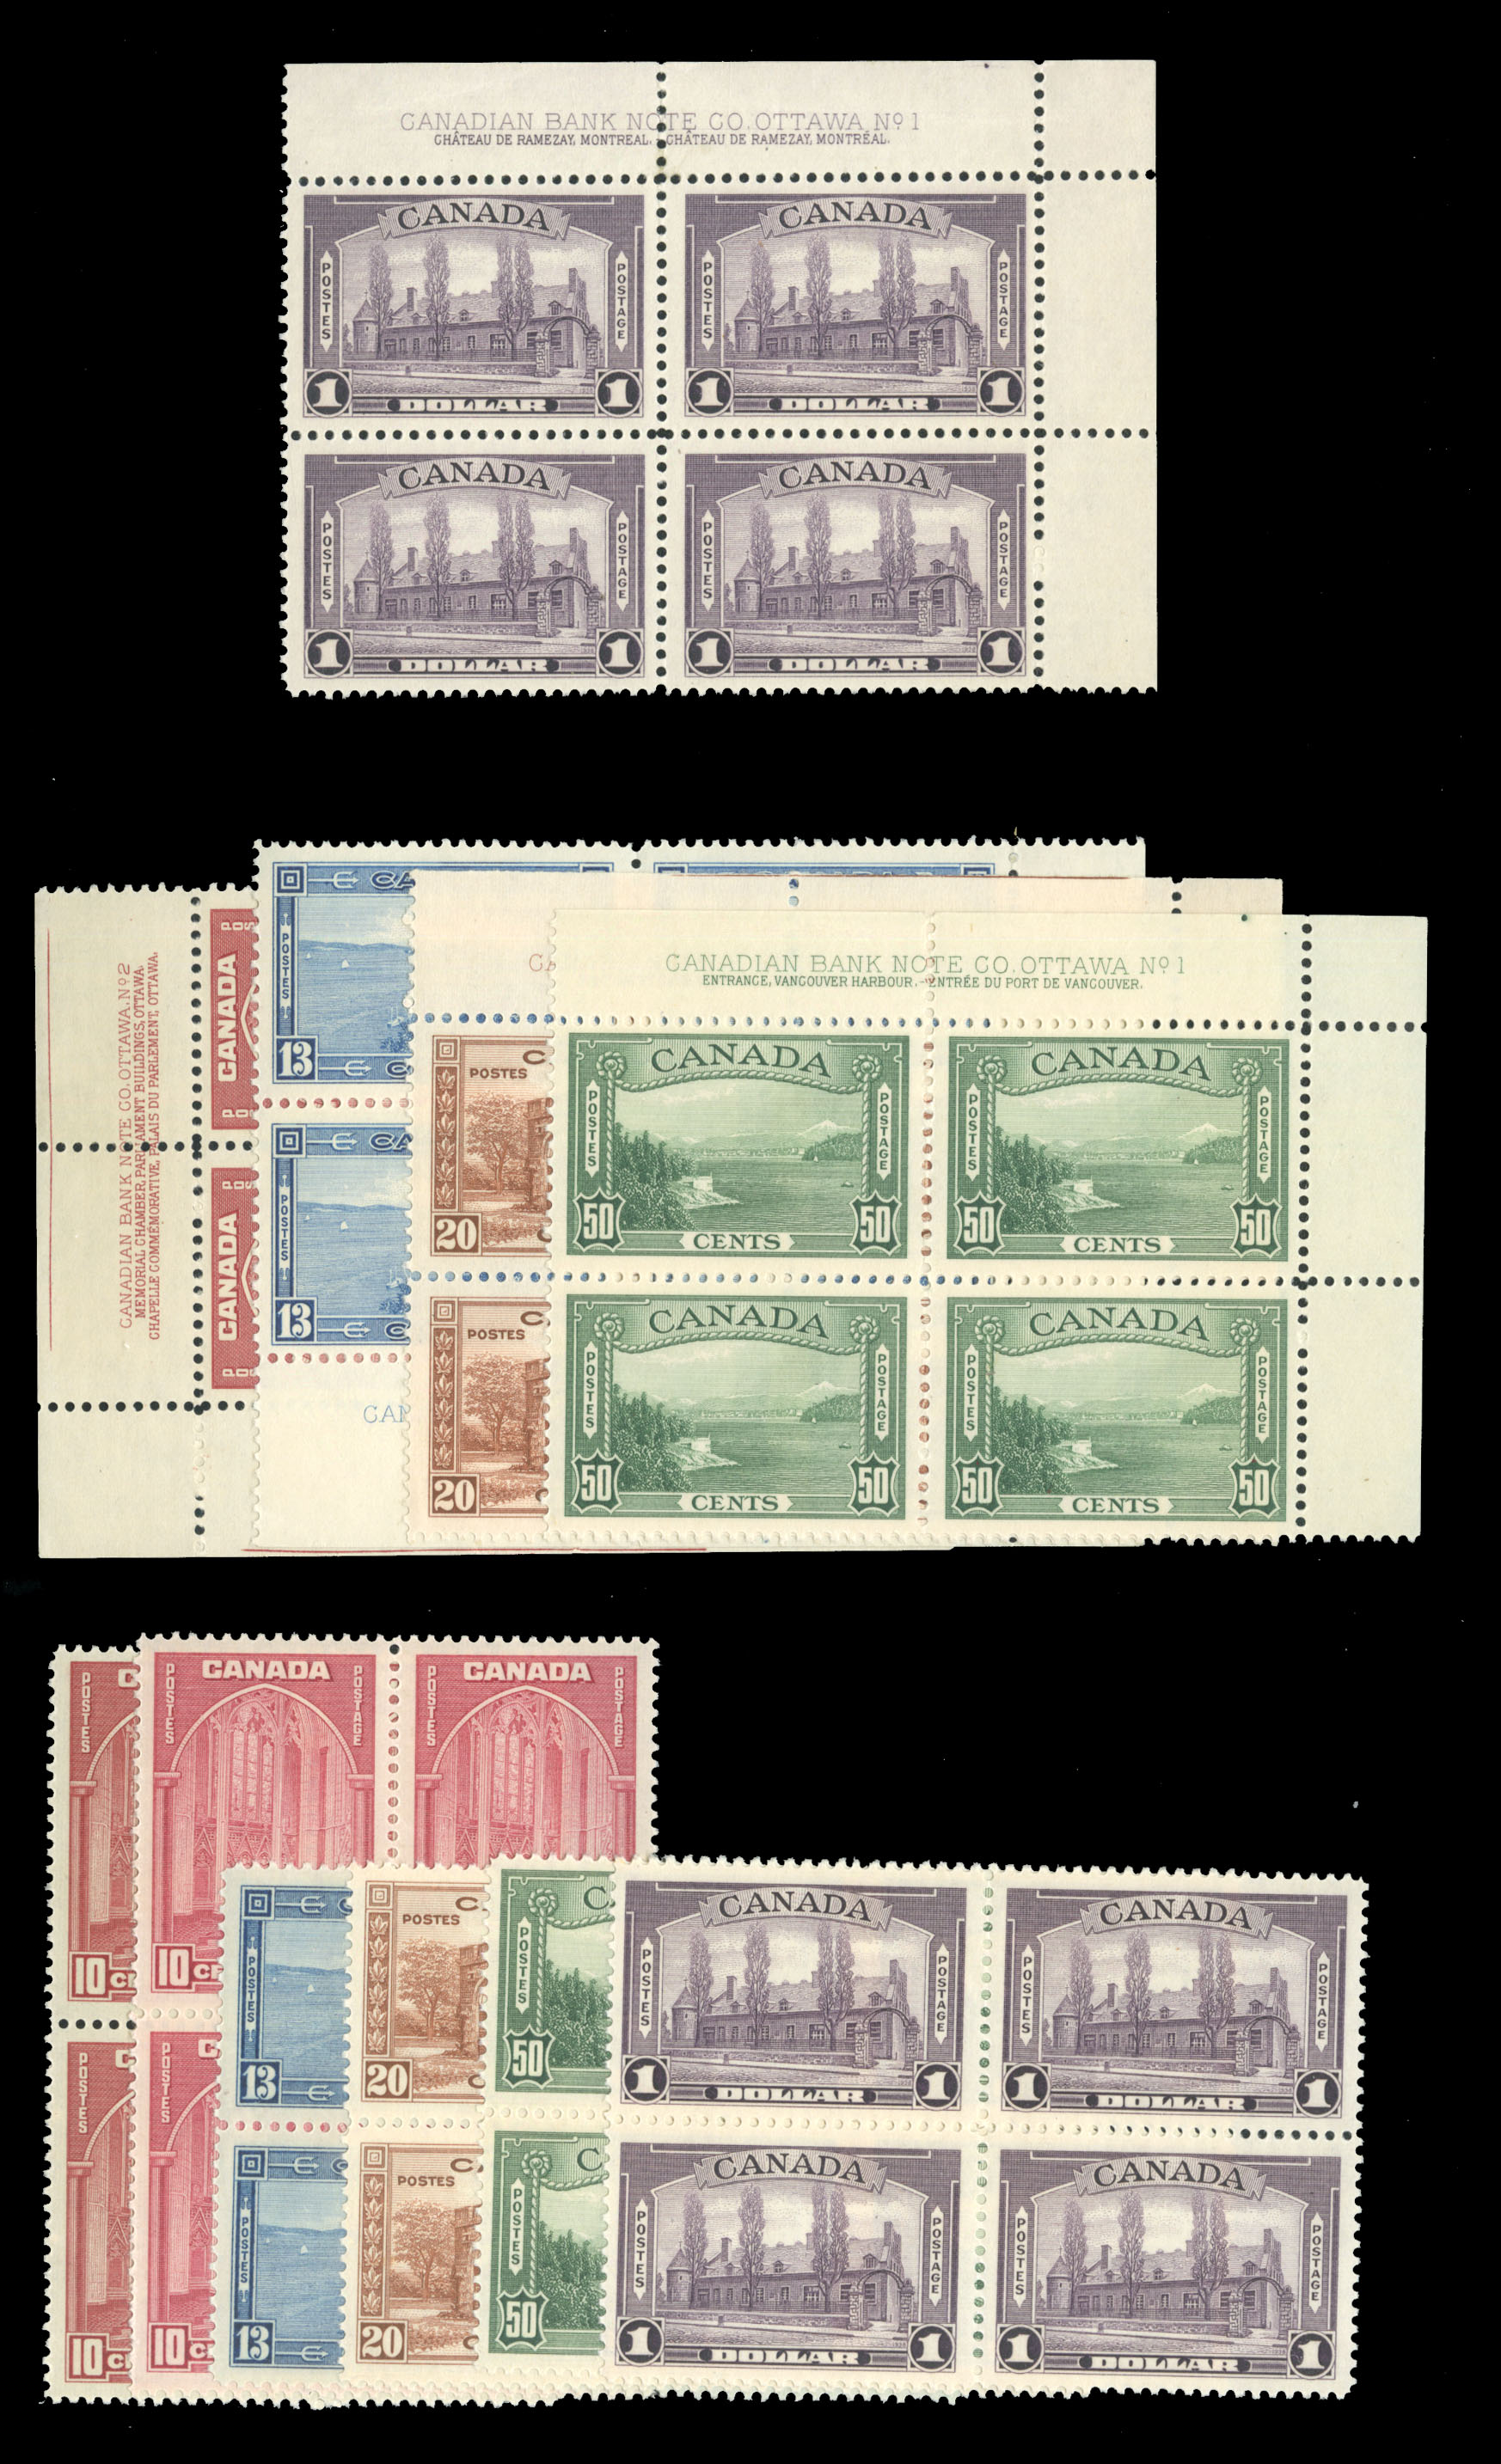 Lot 785 - LARGE LOTS AND COLLECTIONS UNITED STATES  -  Cherrystone Auctions Rare Stamps & Postal History of the World